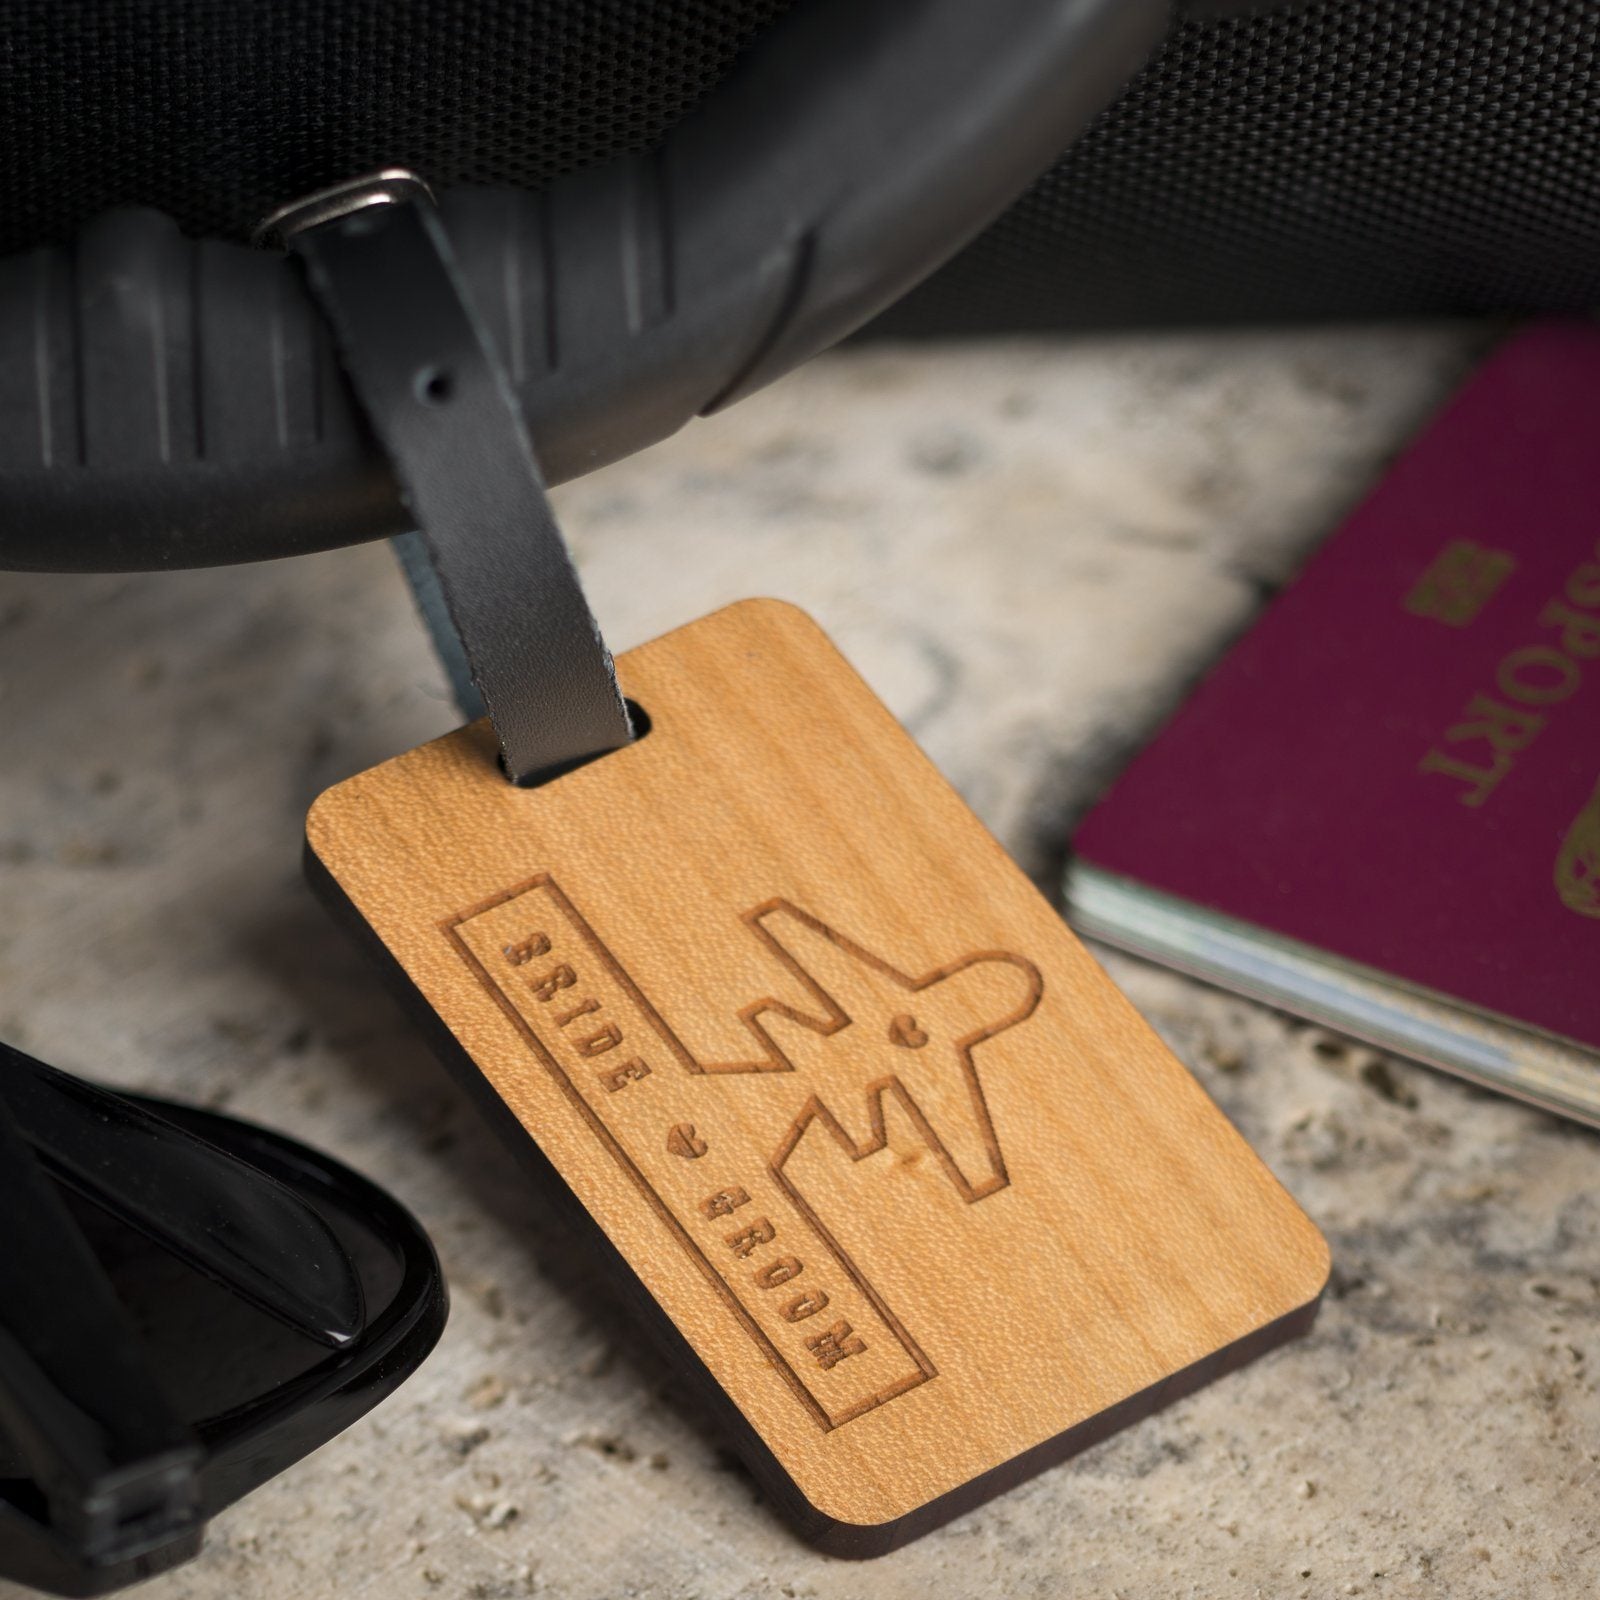 Luggage Tags - Personalised Laser Engraved Wooden Luggage Tag With Leather Strap - Plane Banner Design